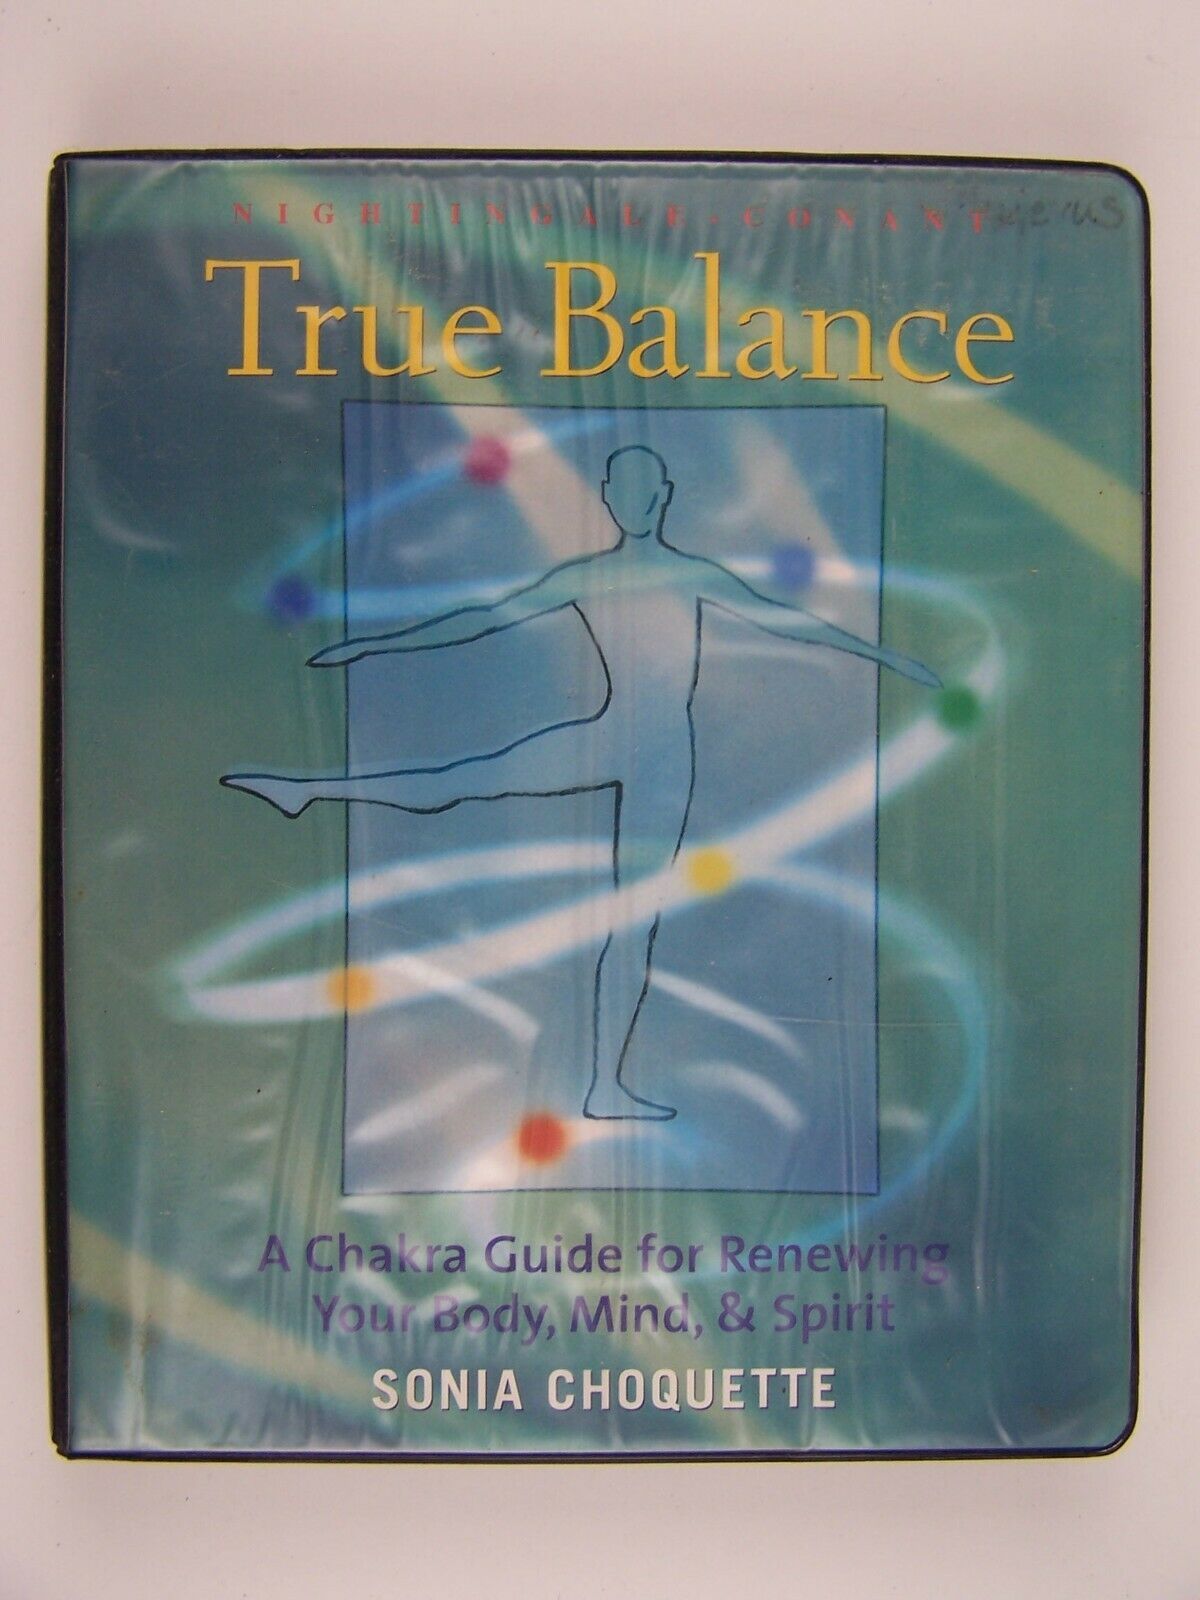 Primary image for True Balance Audio Cassette Book Unabridged 2000 by Sonia Choquette